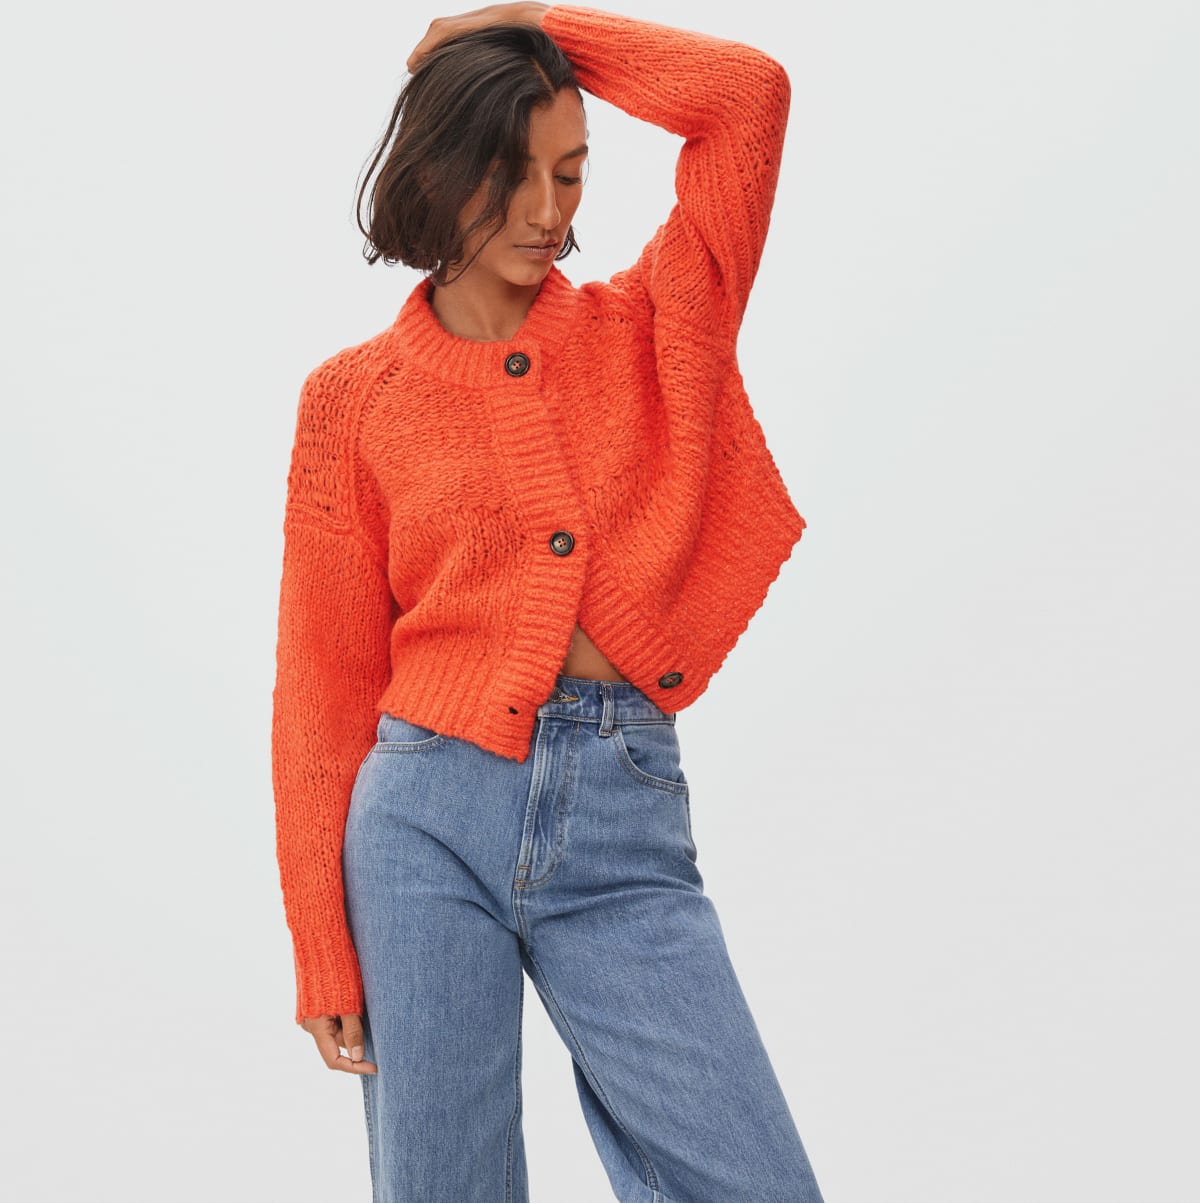 5 Sustainable Sweaters to Bundle up With This Autumn